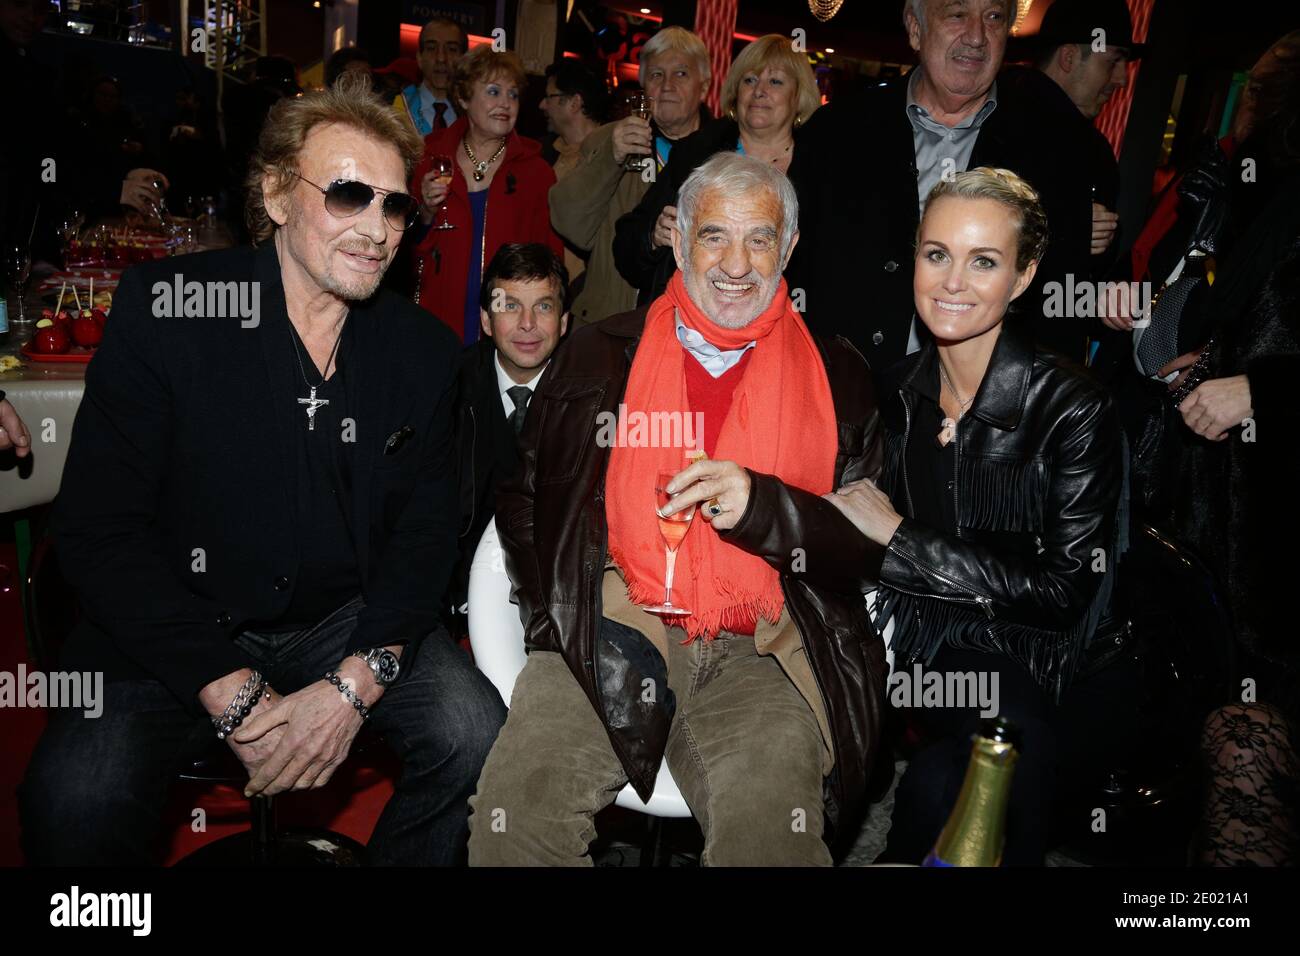 File photo : Johnny Hallyday, Laeticia Hallyday and Jean-Paul Belmondo attending the Grand Palais funfair Party hosted by Marcel Campion in Paris, France on December 19, 2013. France's biggest rock star Johnny Hallyday has died from lung cancer, his wife says. He was 74. The singer - real name Jean-Philippe Smet - sold about 100 million records and starred in a number of films. Photo by Jerome Domine/ABACAPRESS.COM Stock Photo